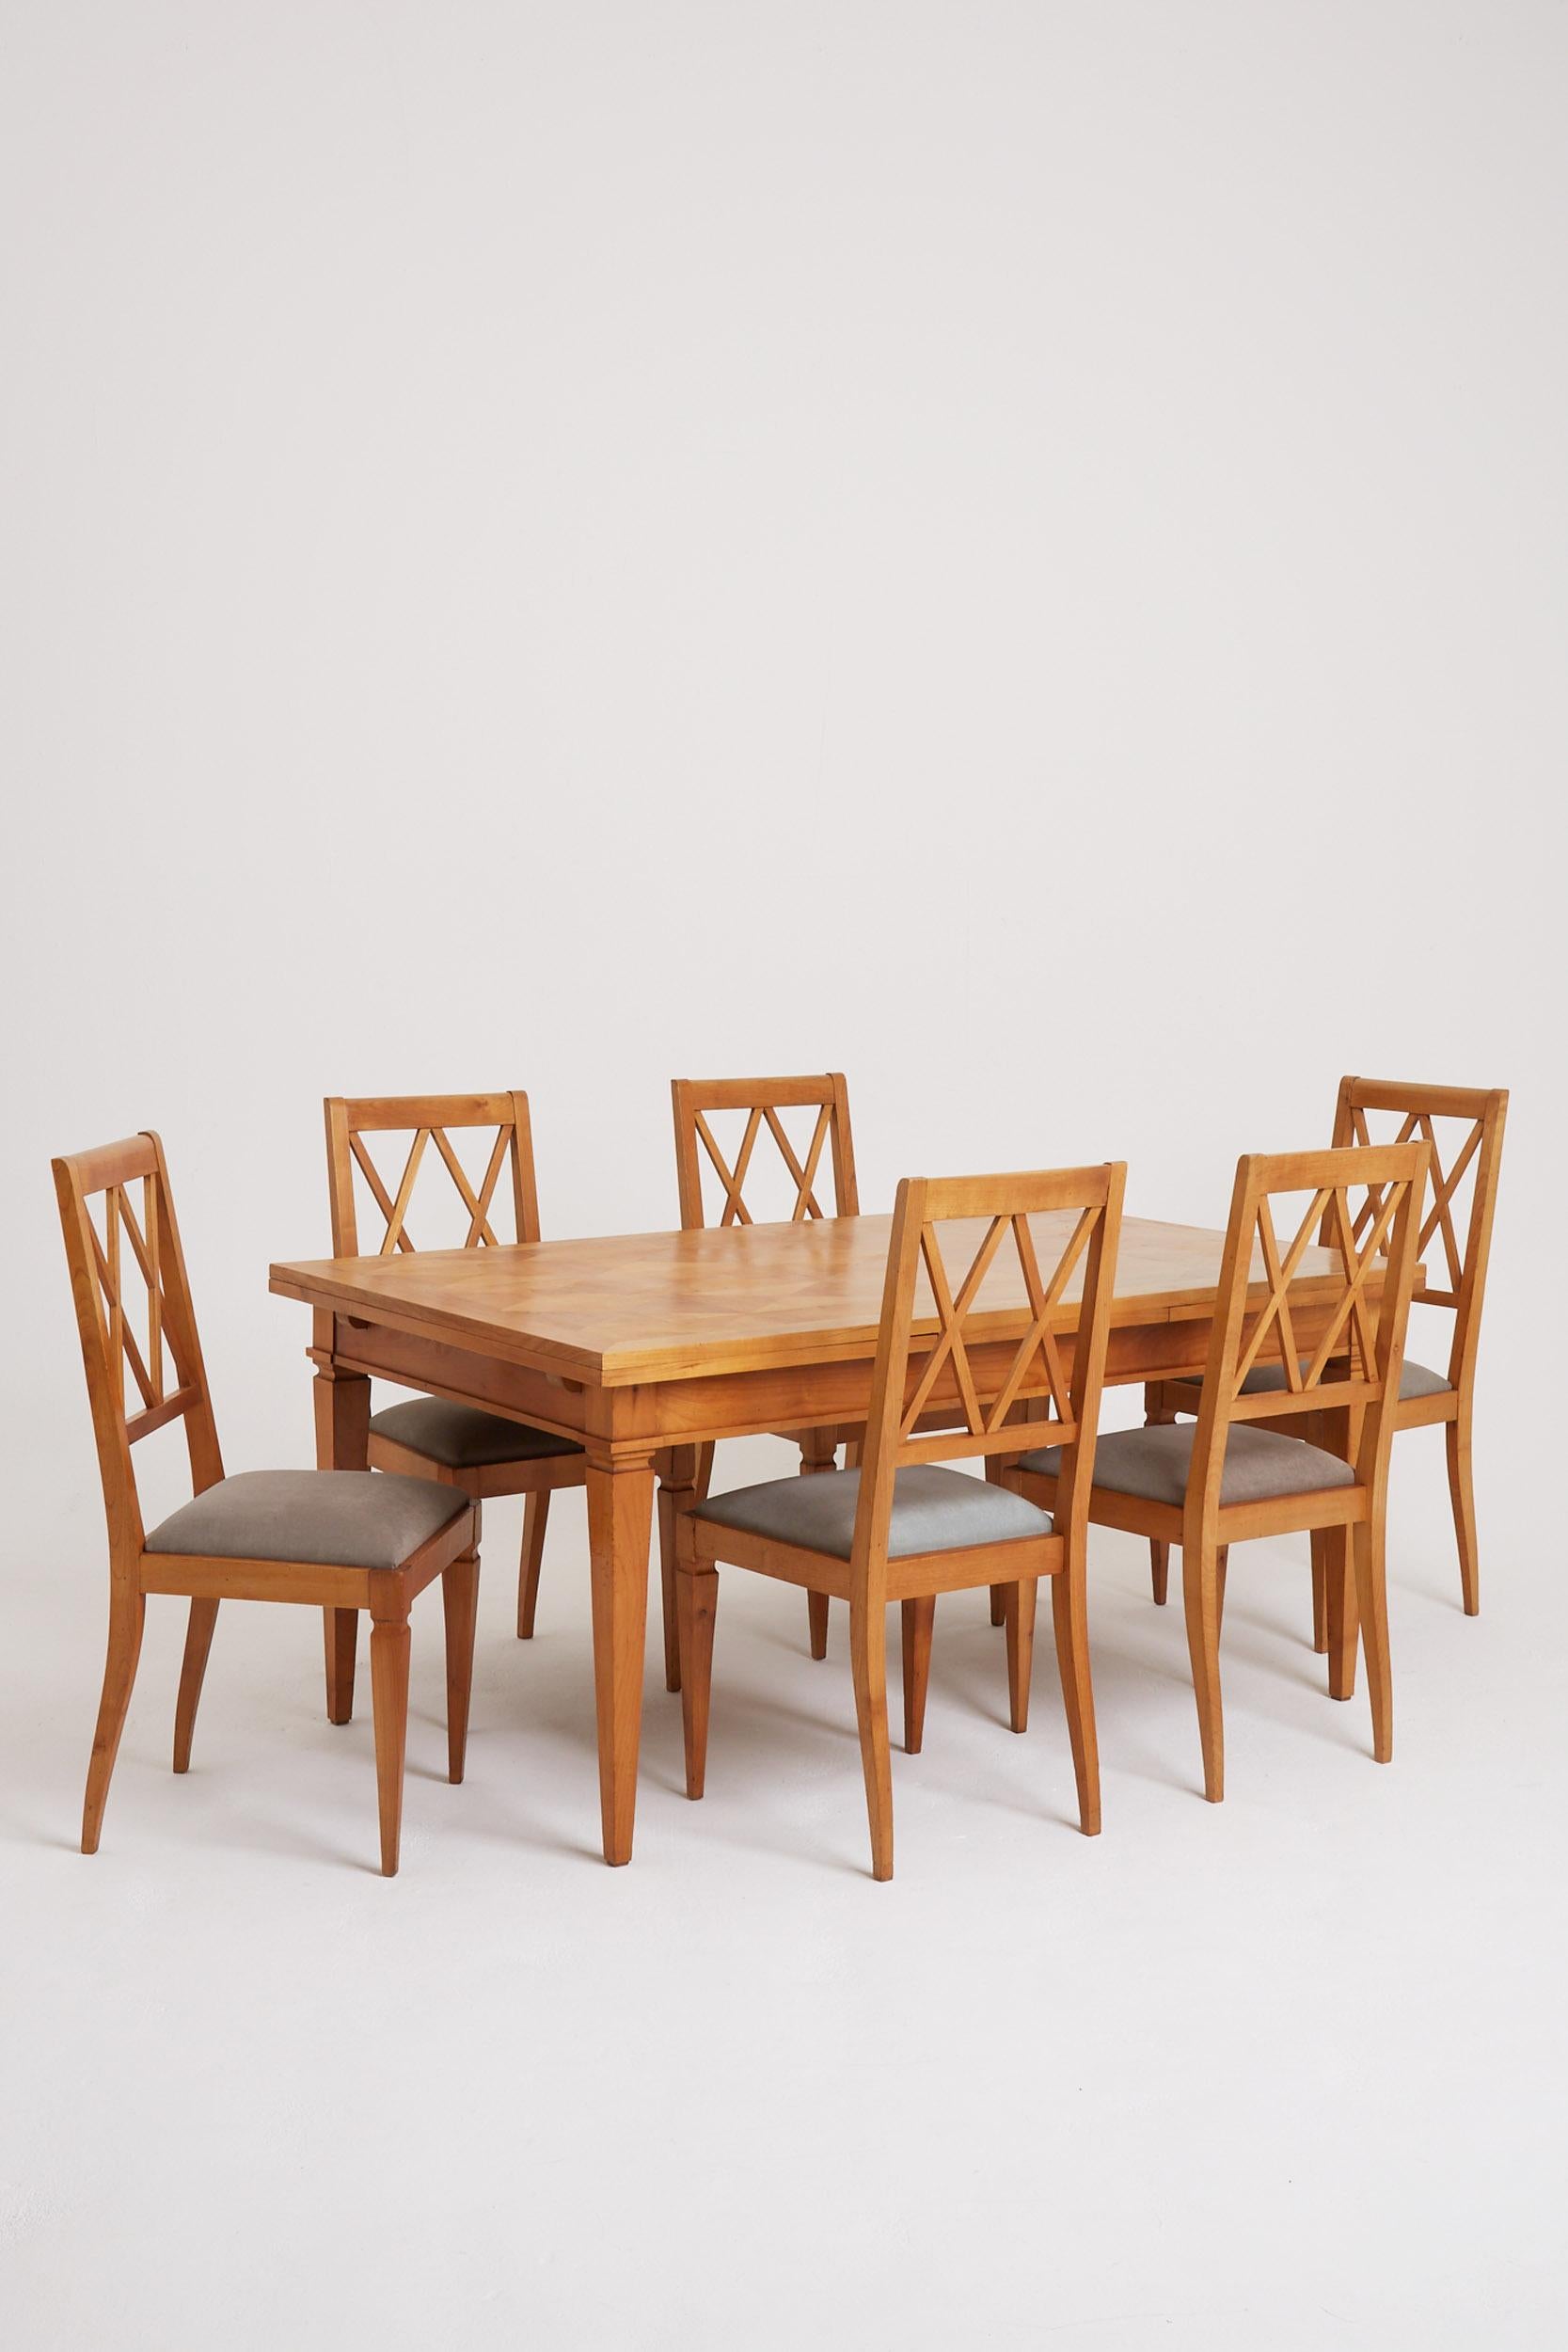 An Art Deco ash dining room set, comprising an extending dining table (with two leaves, concealed under the top) and six dining chairs.
France, Circa 1940
Dining table: 73.5 cm high by 160 cm wide by 98 cm, each leaf is 57.5 cm wide, fully